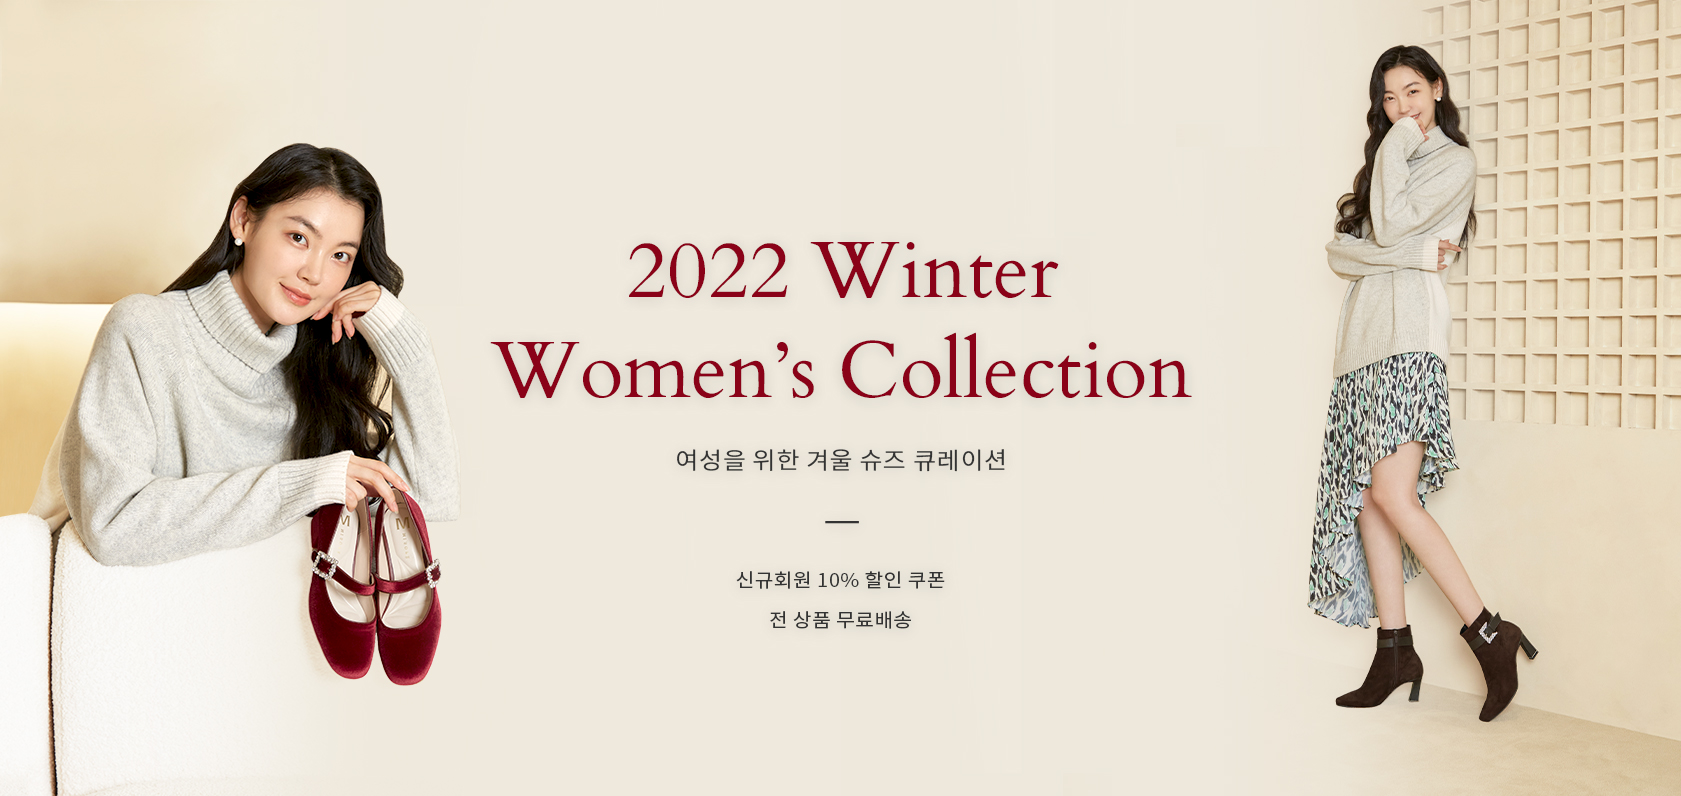 [WOMAN] 2022 F/W SHOES COLLECTION